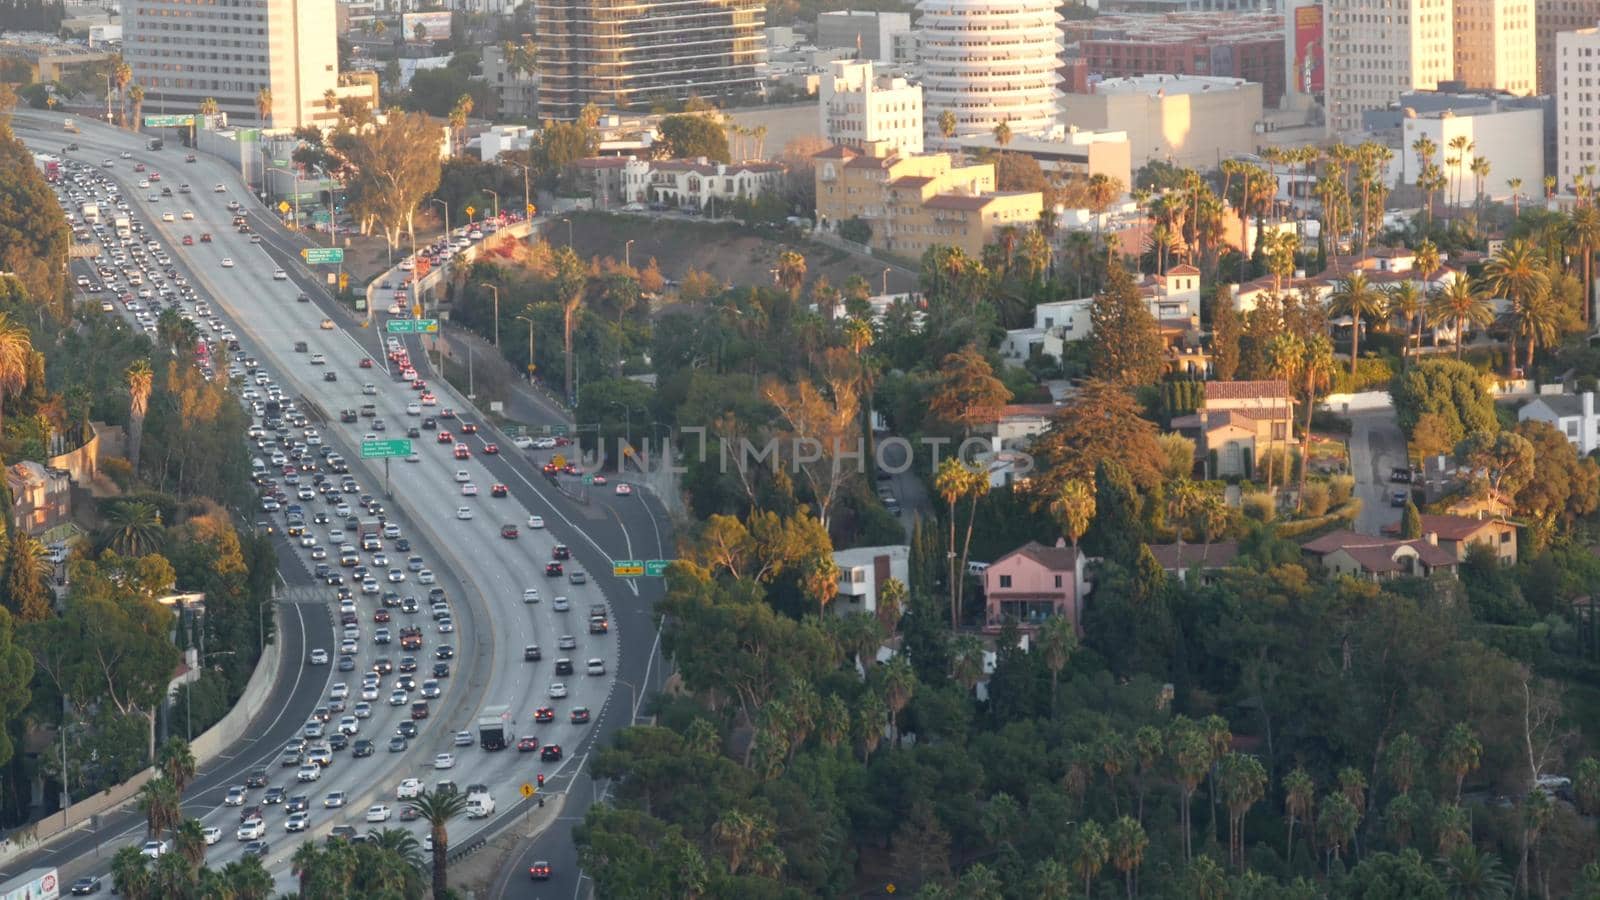 Busy rush hour intercity highway in metropolis, Los Angeles, California USA. Urban traffic jam on road in sunlight. Aerial view of cars on multiple lane driveway. Freeway with automobiles in LA city by DogoraSun